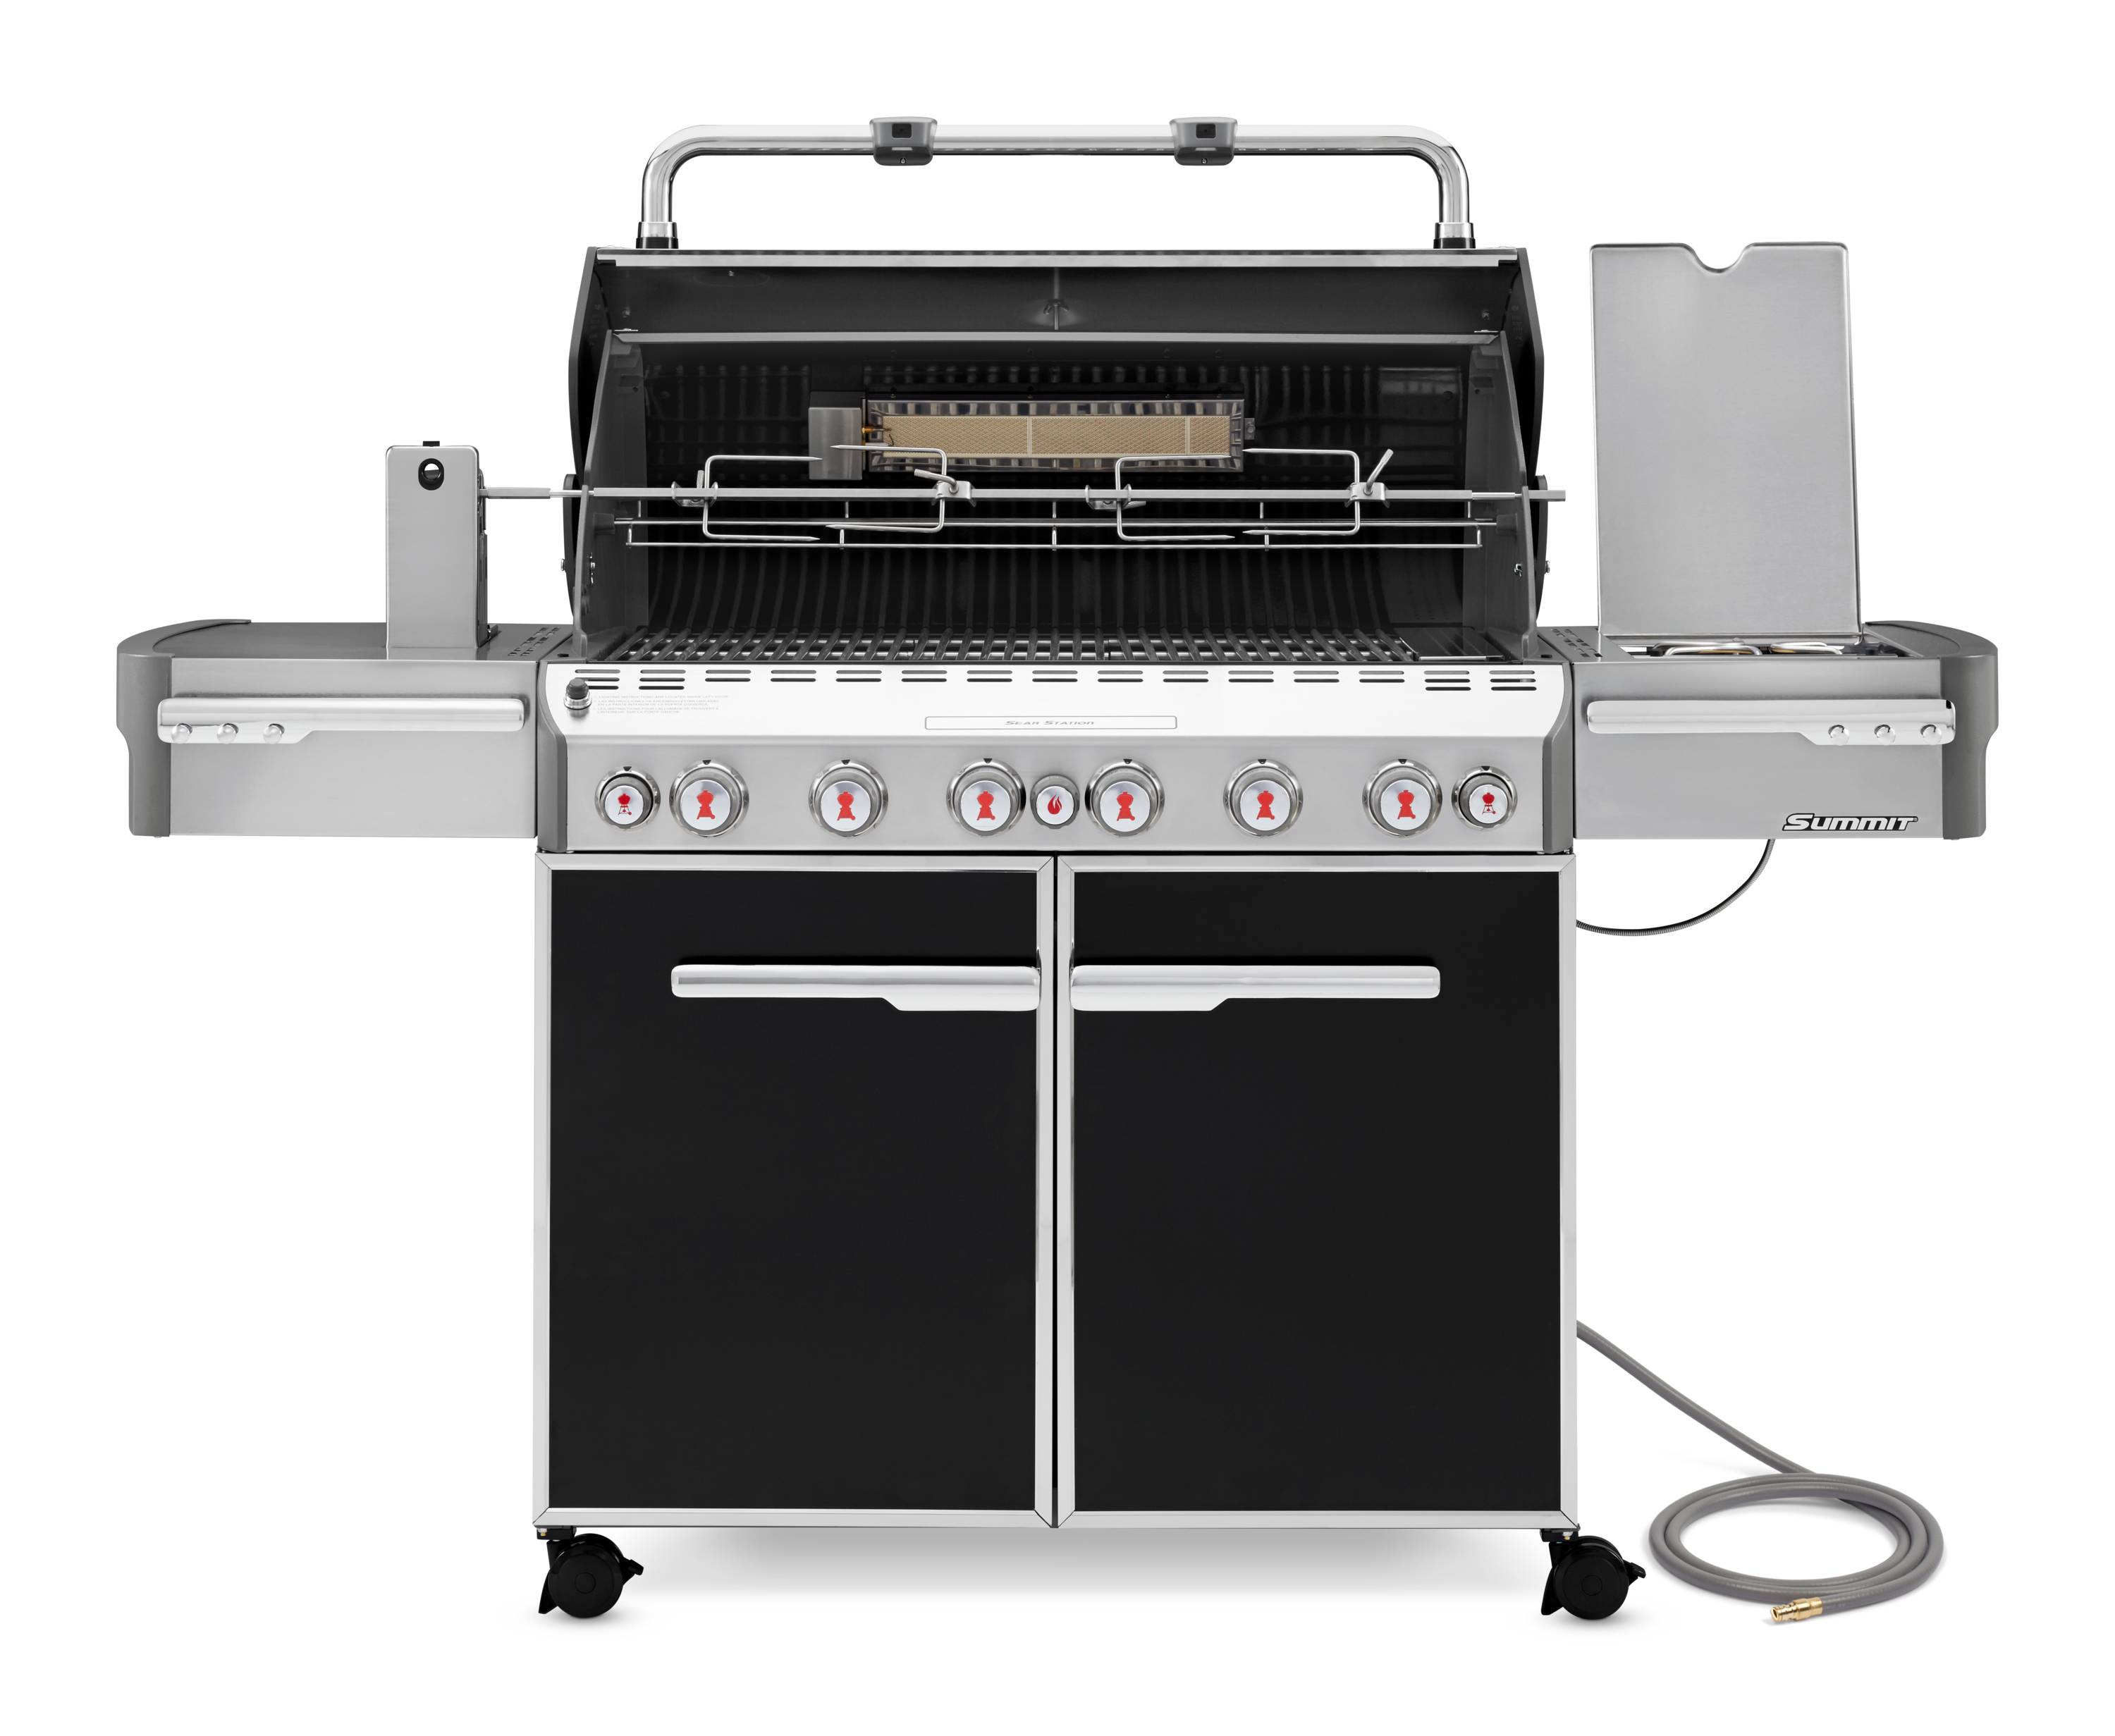 Weber E-670 Black 6-Burner Natural Gas Infrared Gas Grill 1 Side Burner with Rotisserie Burner with Integrated Smoker Box in the Gas Grills department at Lowes.com